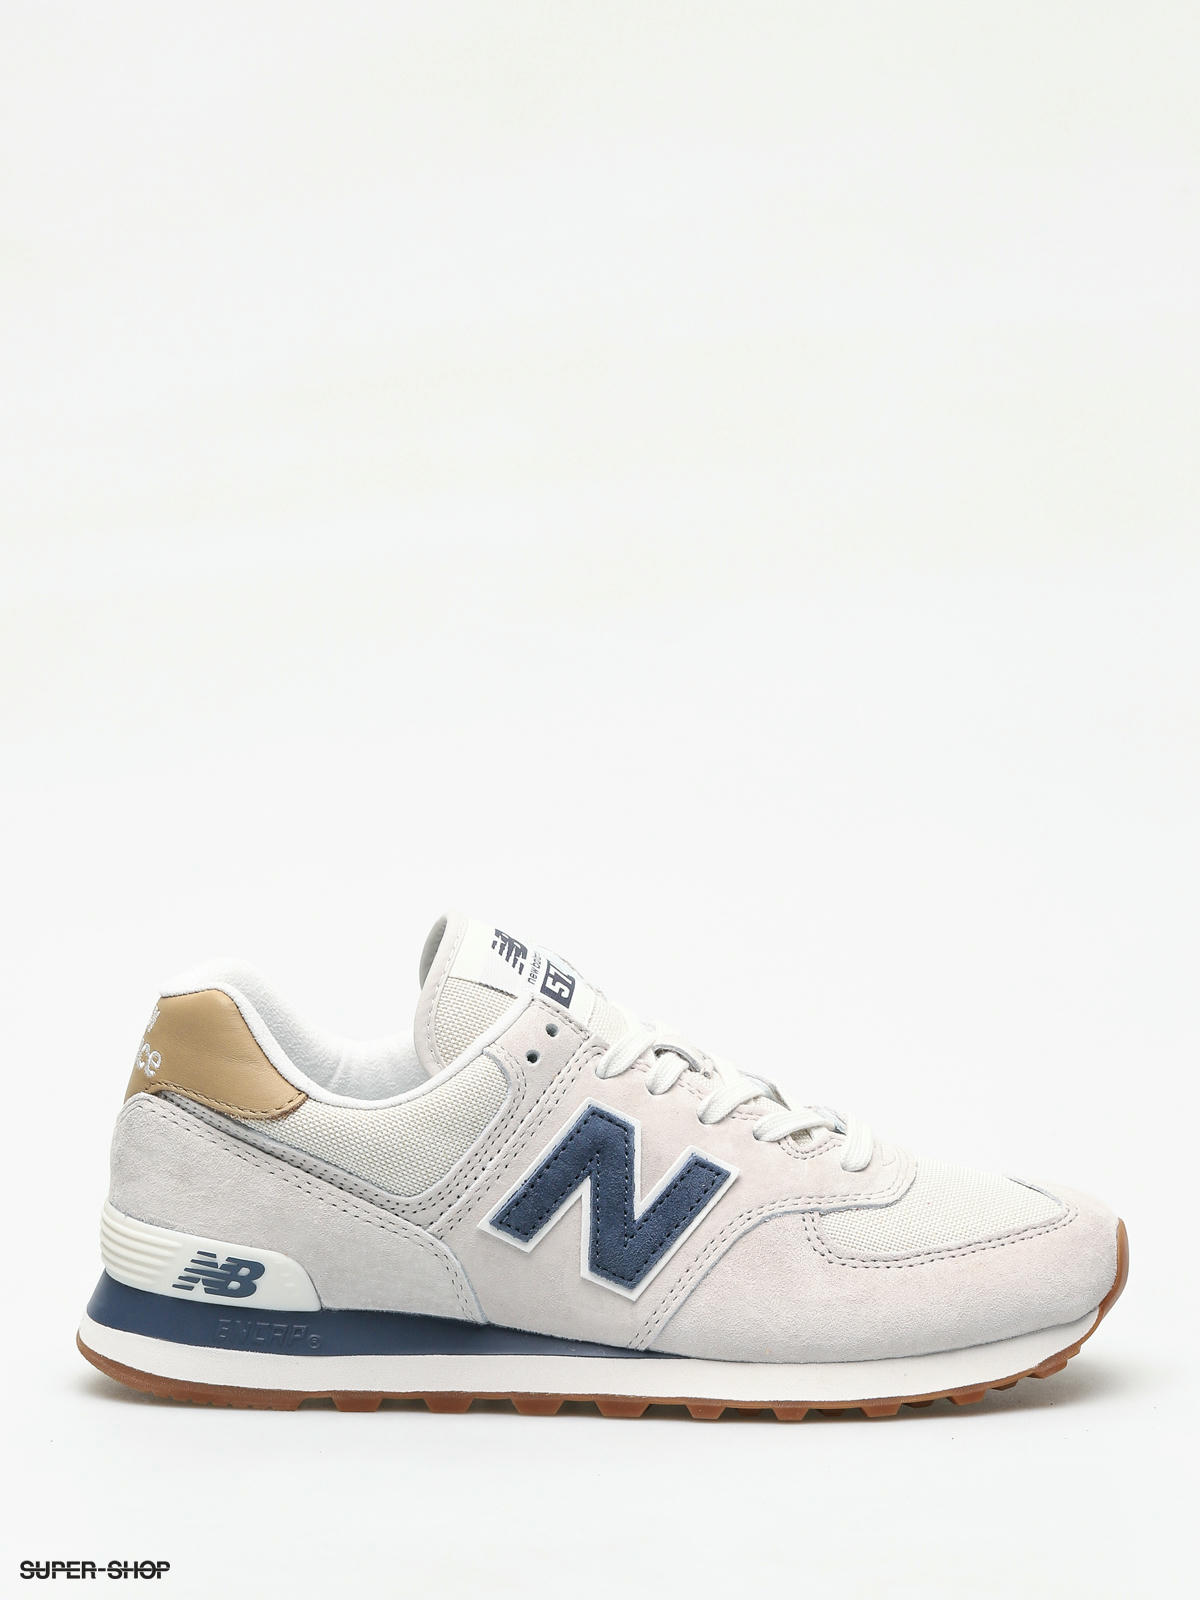 new balance 574 light cliff grey with light cashmere